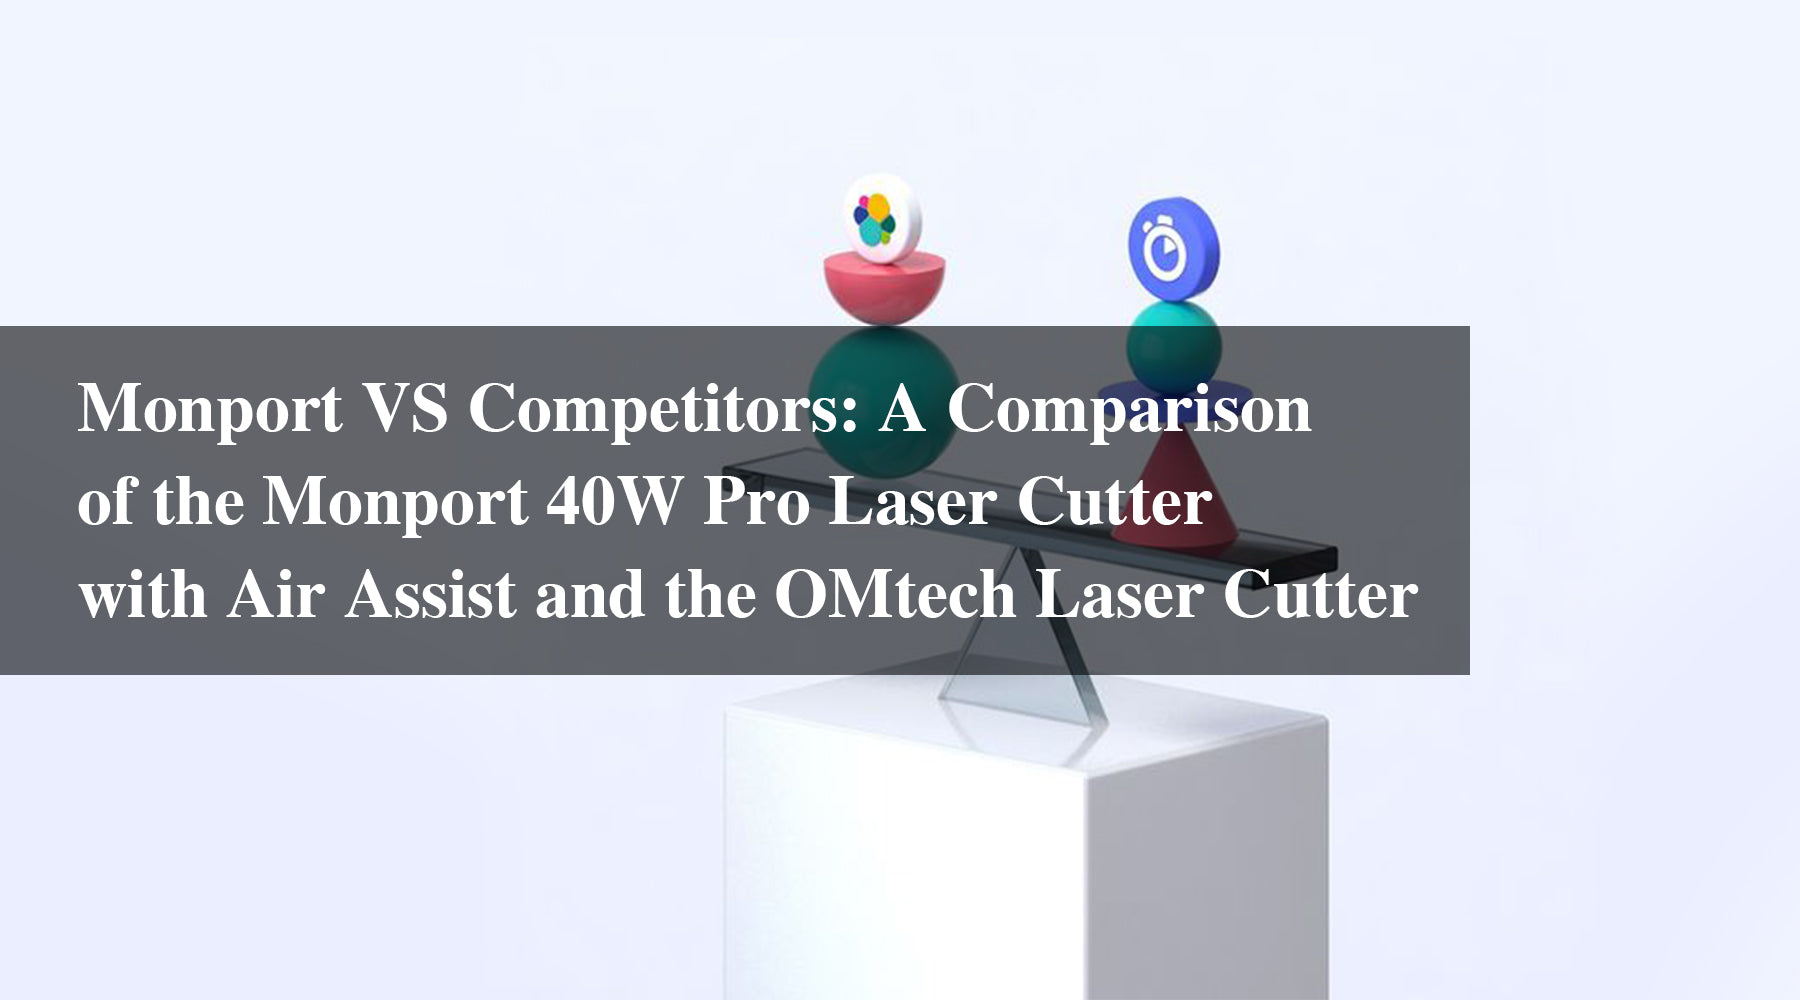 Monport VS Competitors: A Comparison of the Monport 40W Pro Laser Cutter with Air Assist and the OMtech Laser Cutter